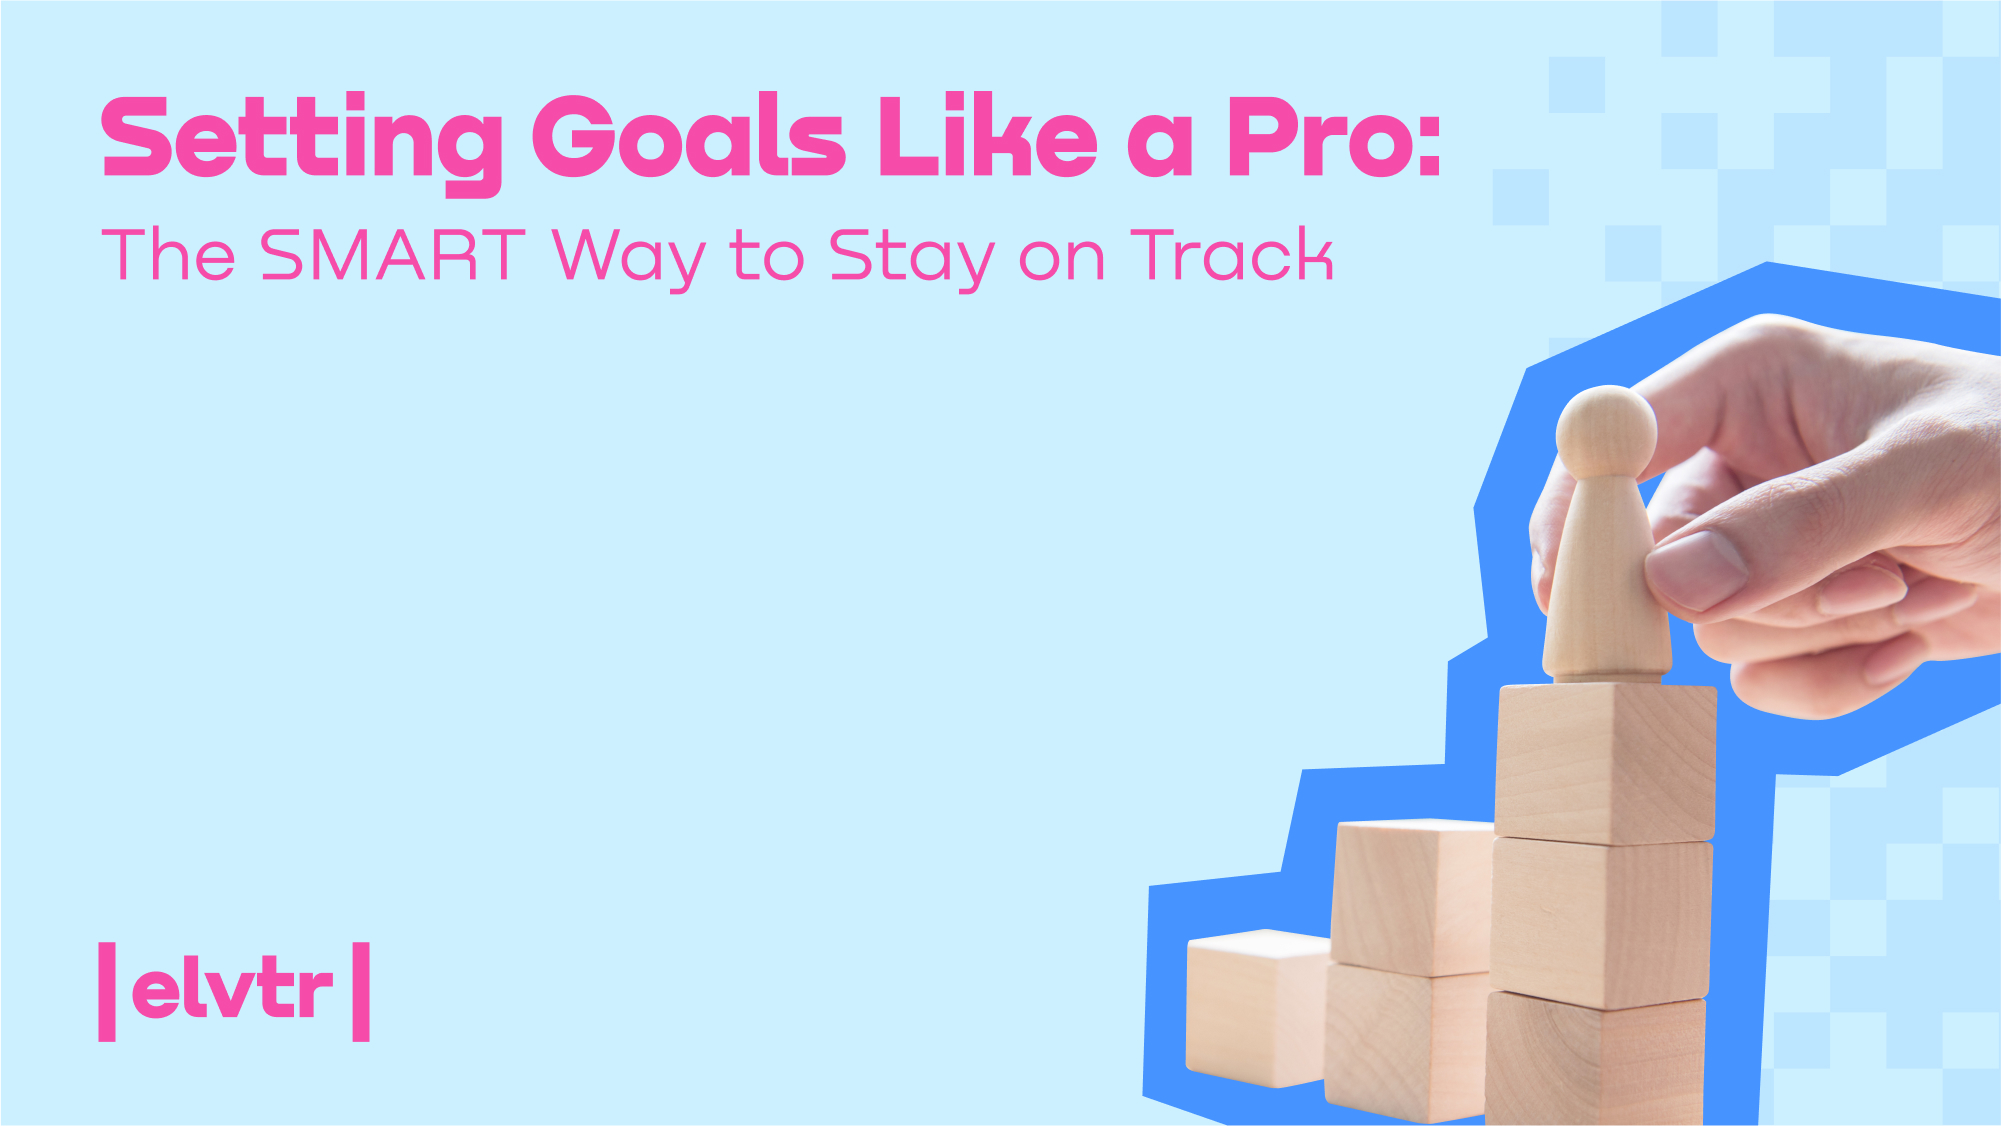 SETTING GOALS LIKE A PRO: THE SMART WAY TO STAY ON TRACK image